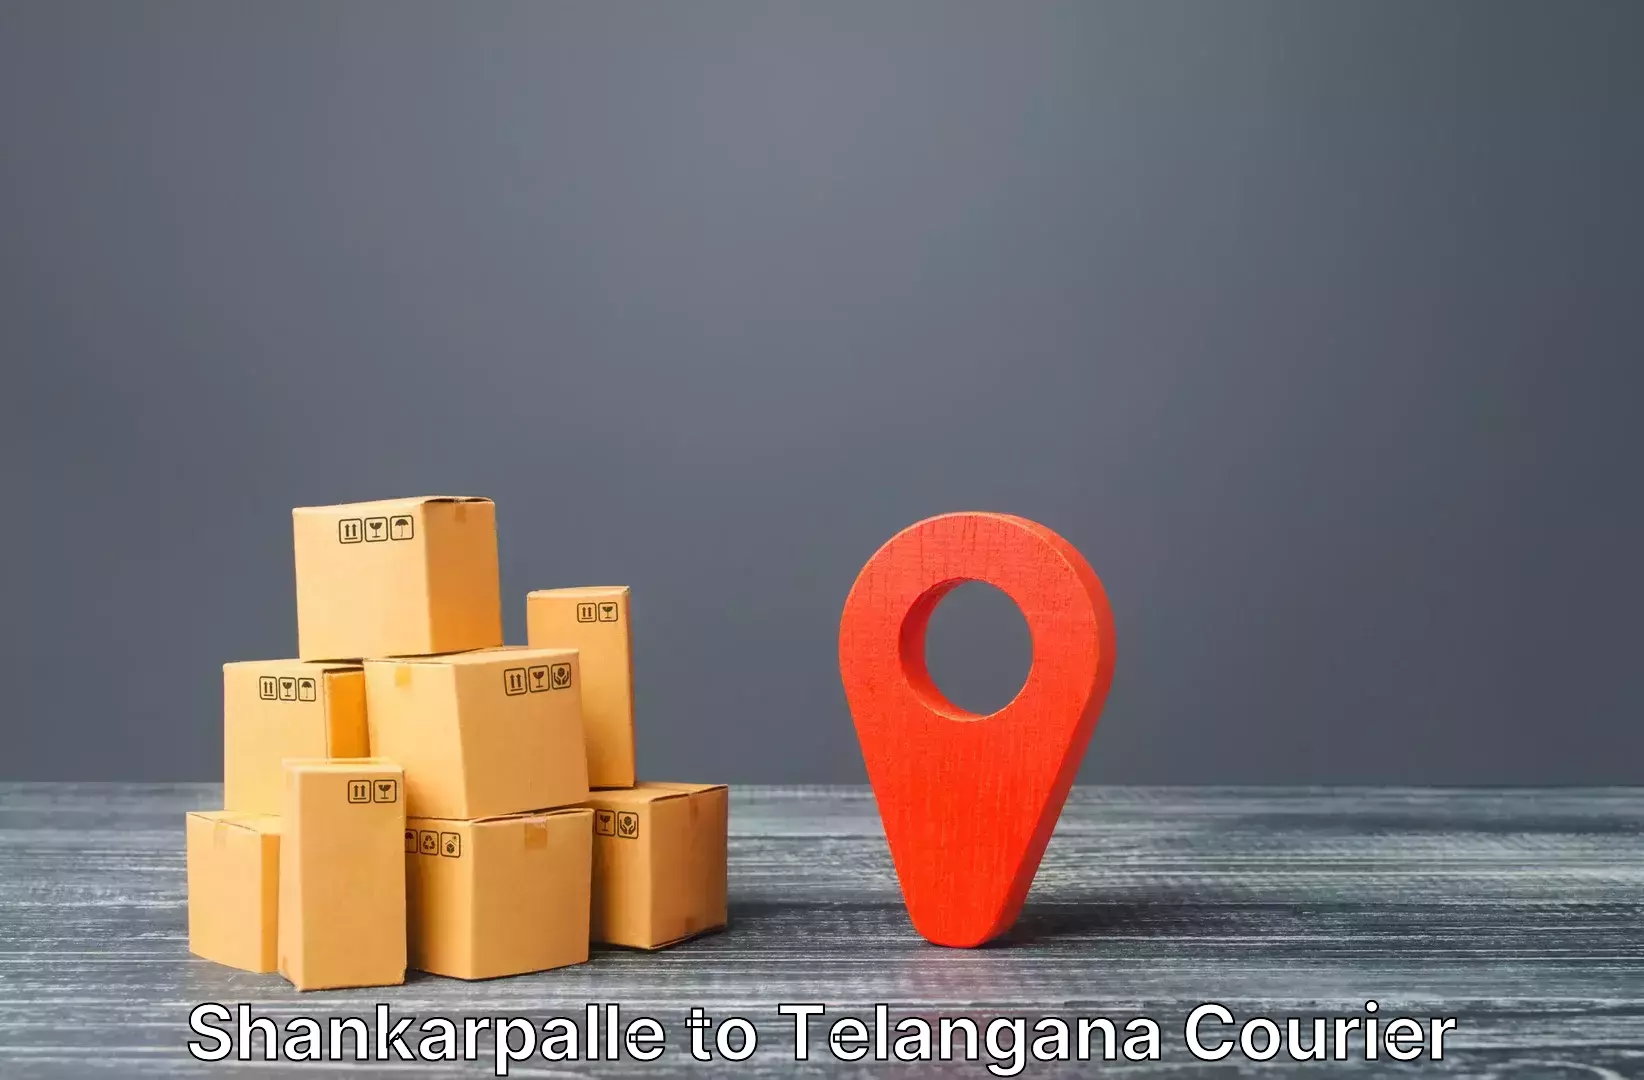 Luggage shipping service Shankarpalle to Narmetta